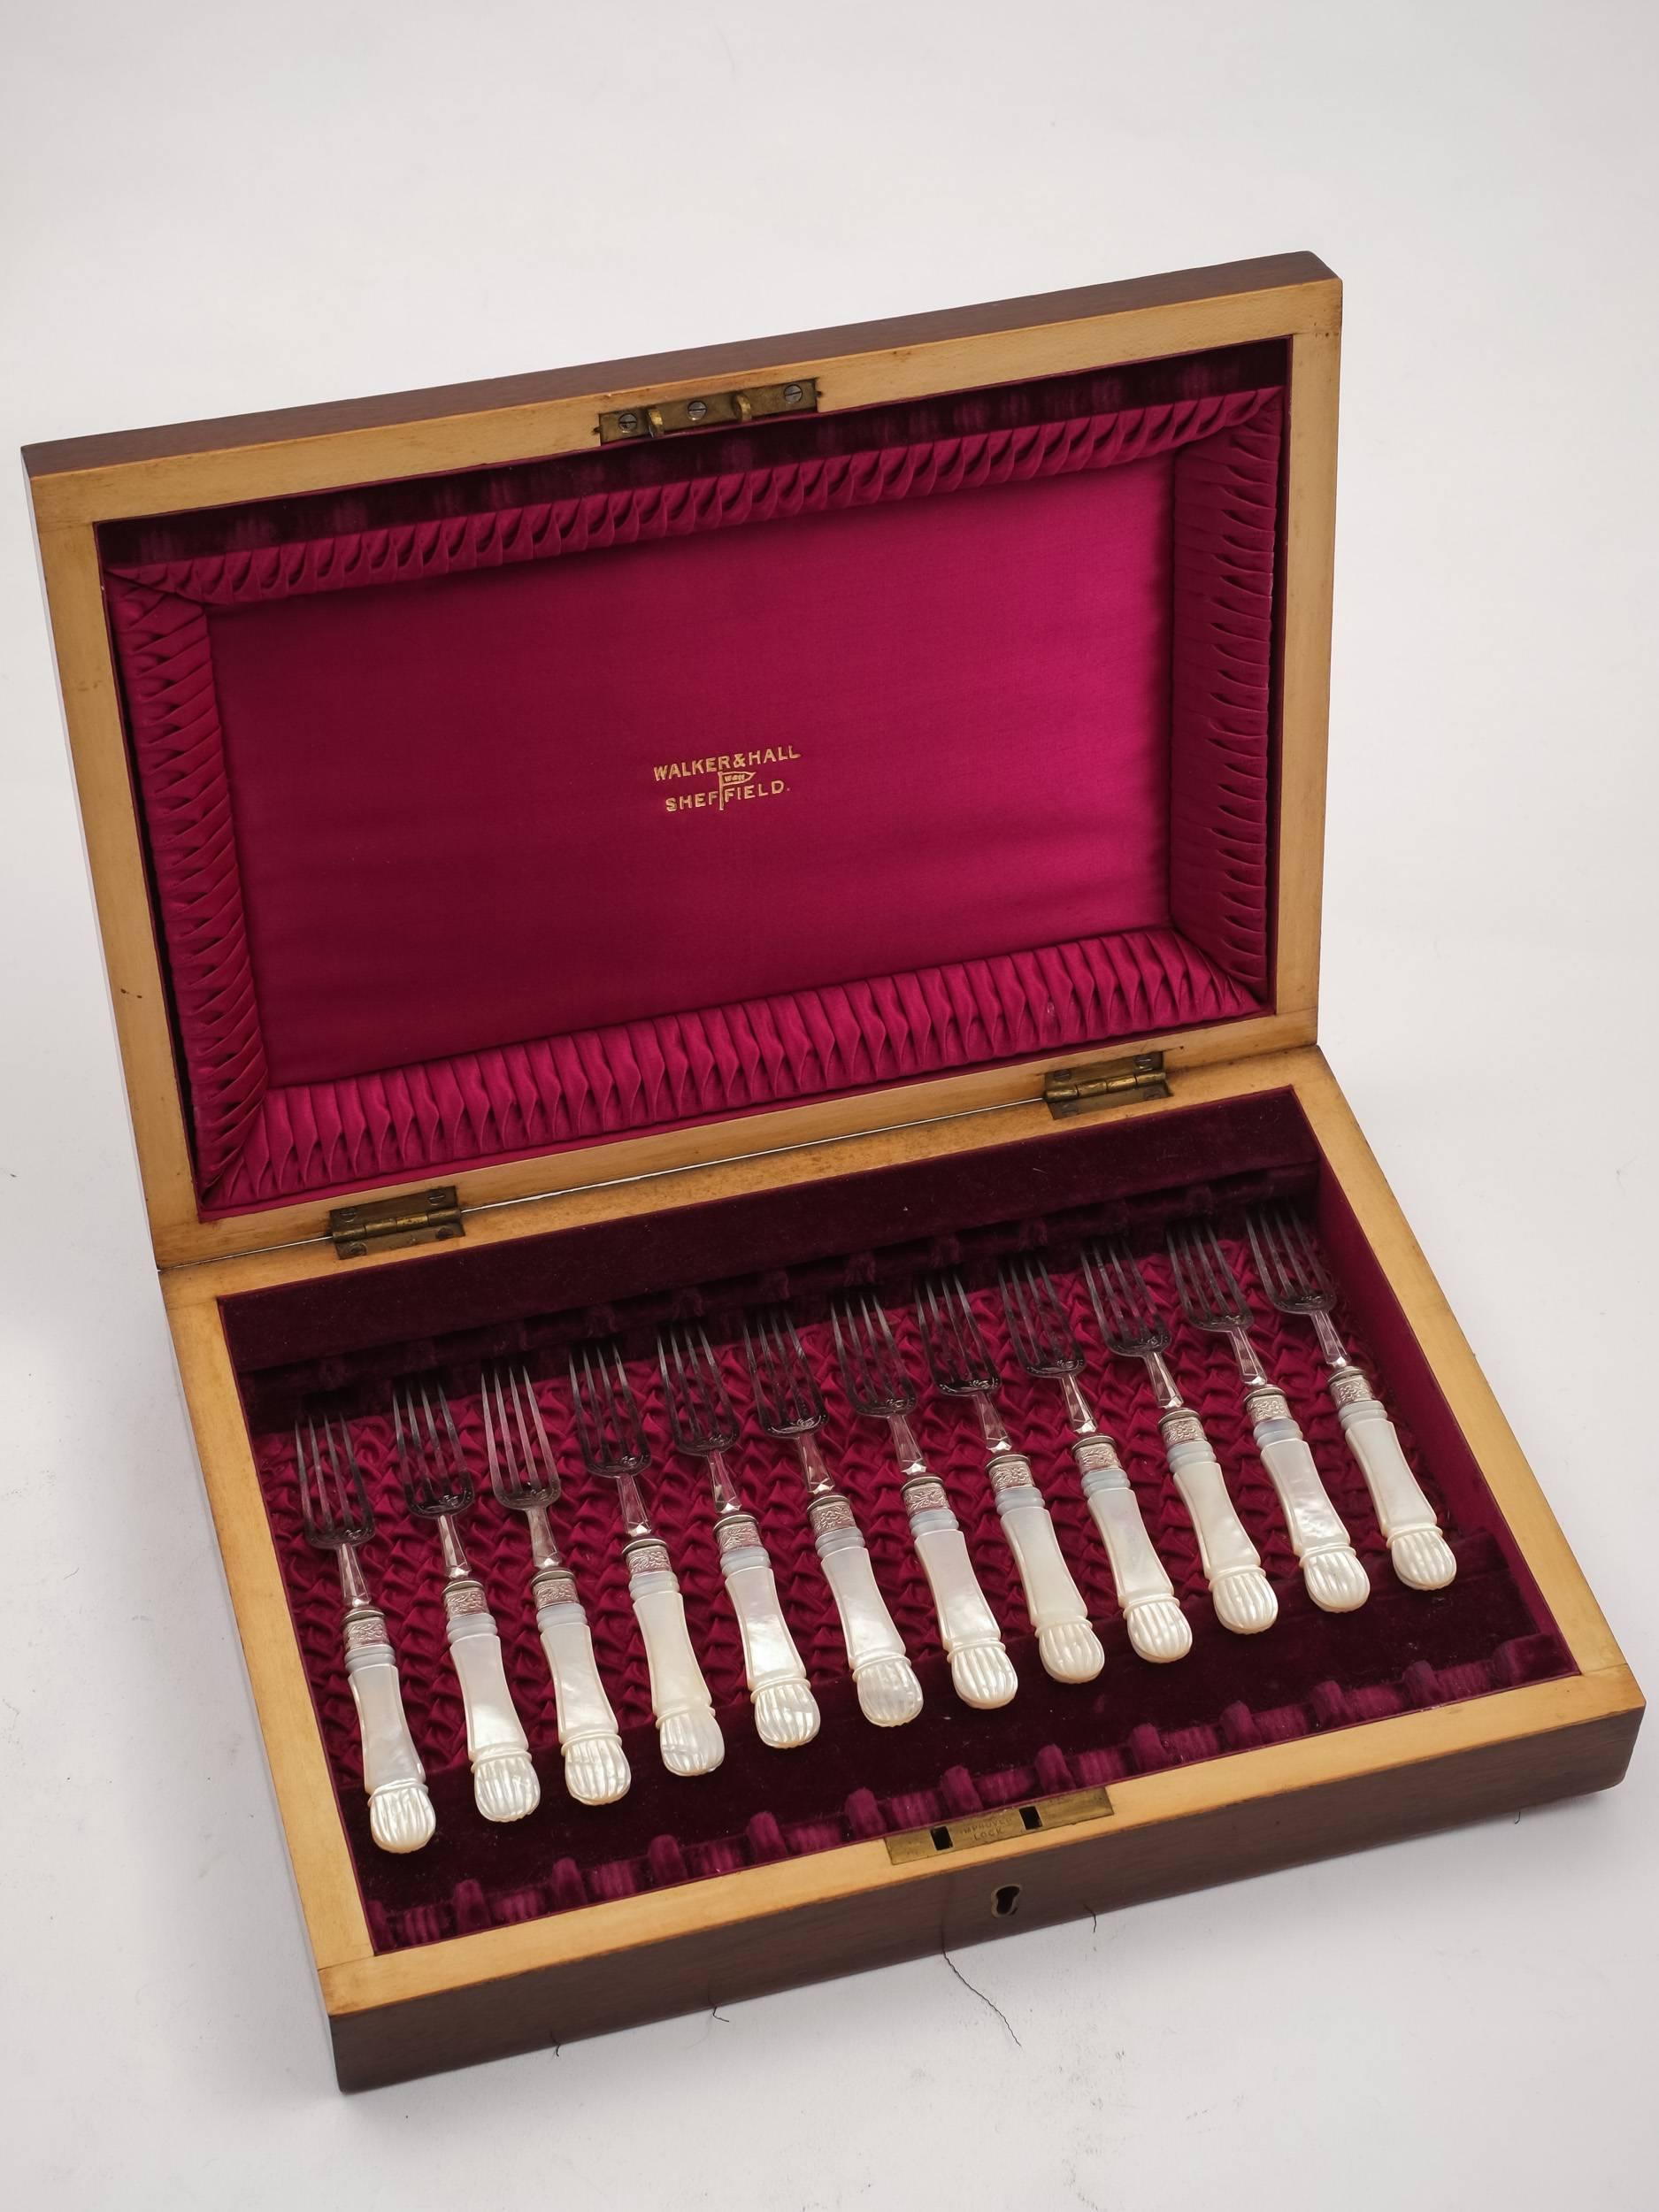 A stunning cased English Edwardian 24 piece dessert set which consists of 12 forks and 12 knives, all of which are silver bladed, beautifully engraved and have carved mother-of-pearl handles. Presented in original red silk and velvet lined mahogany